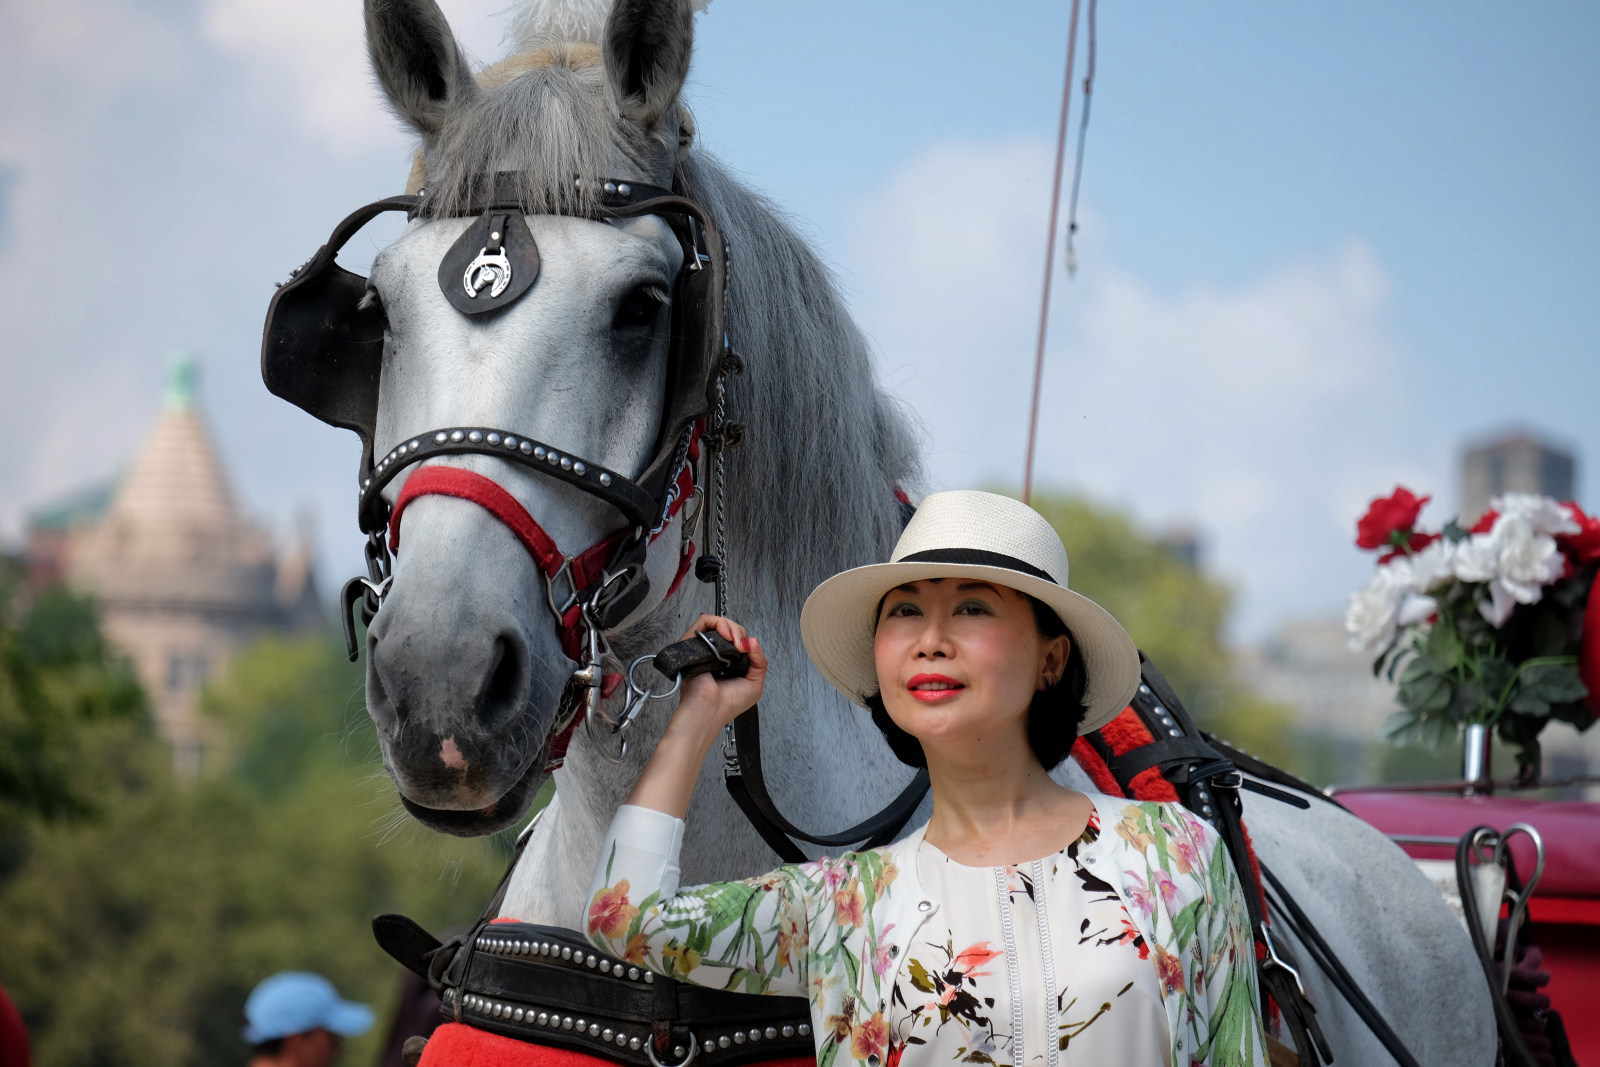 Vivienne with horse and buggy in New Yorks Central Park